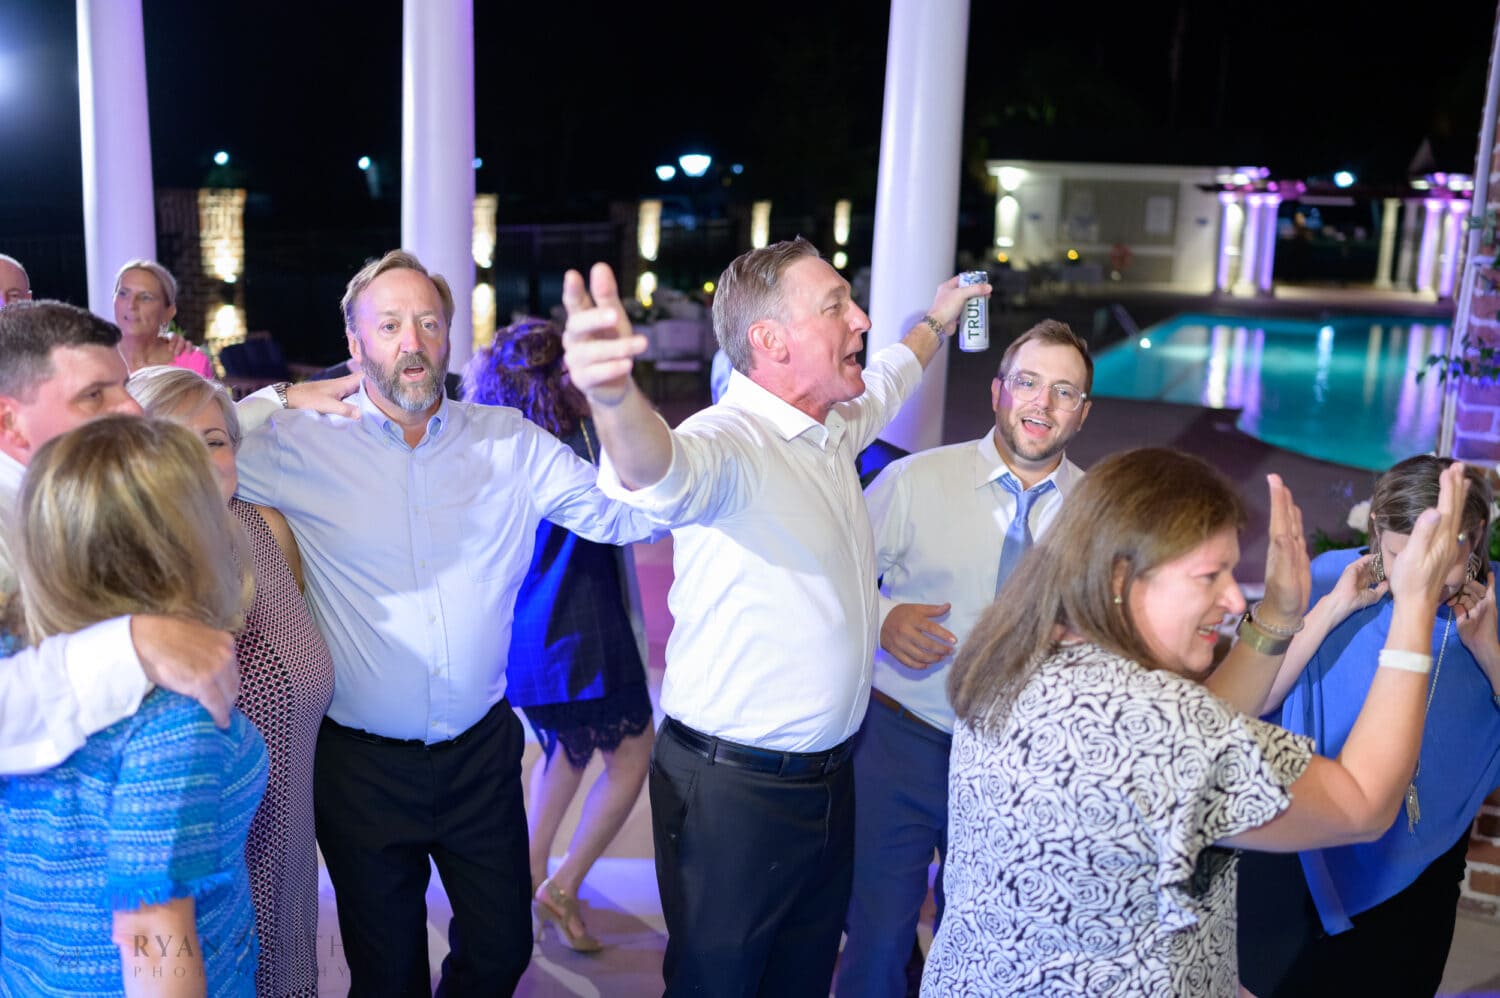 Fun dancing during the reception - Safe Harbor Reserve Harbor Yacht Club